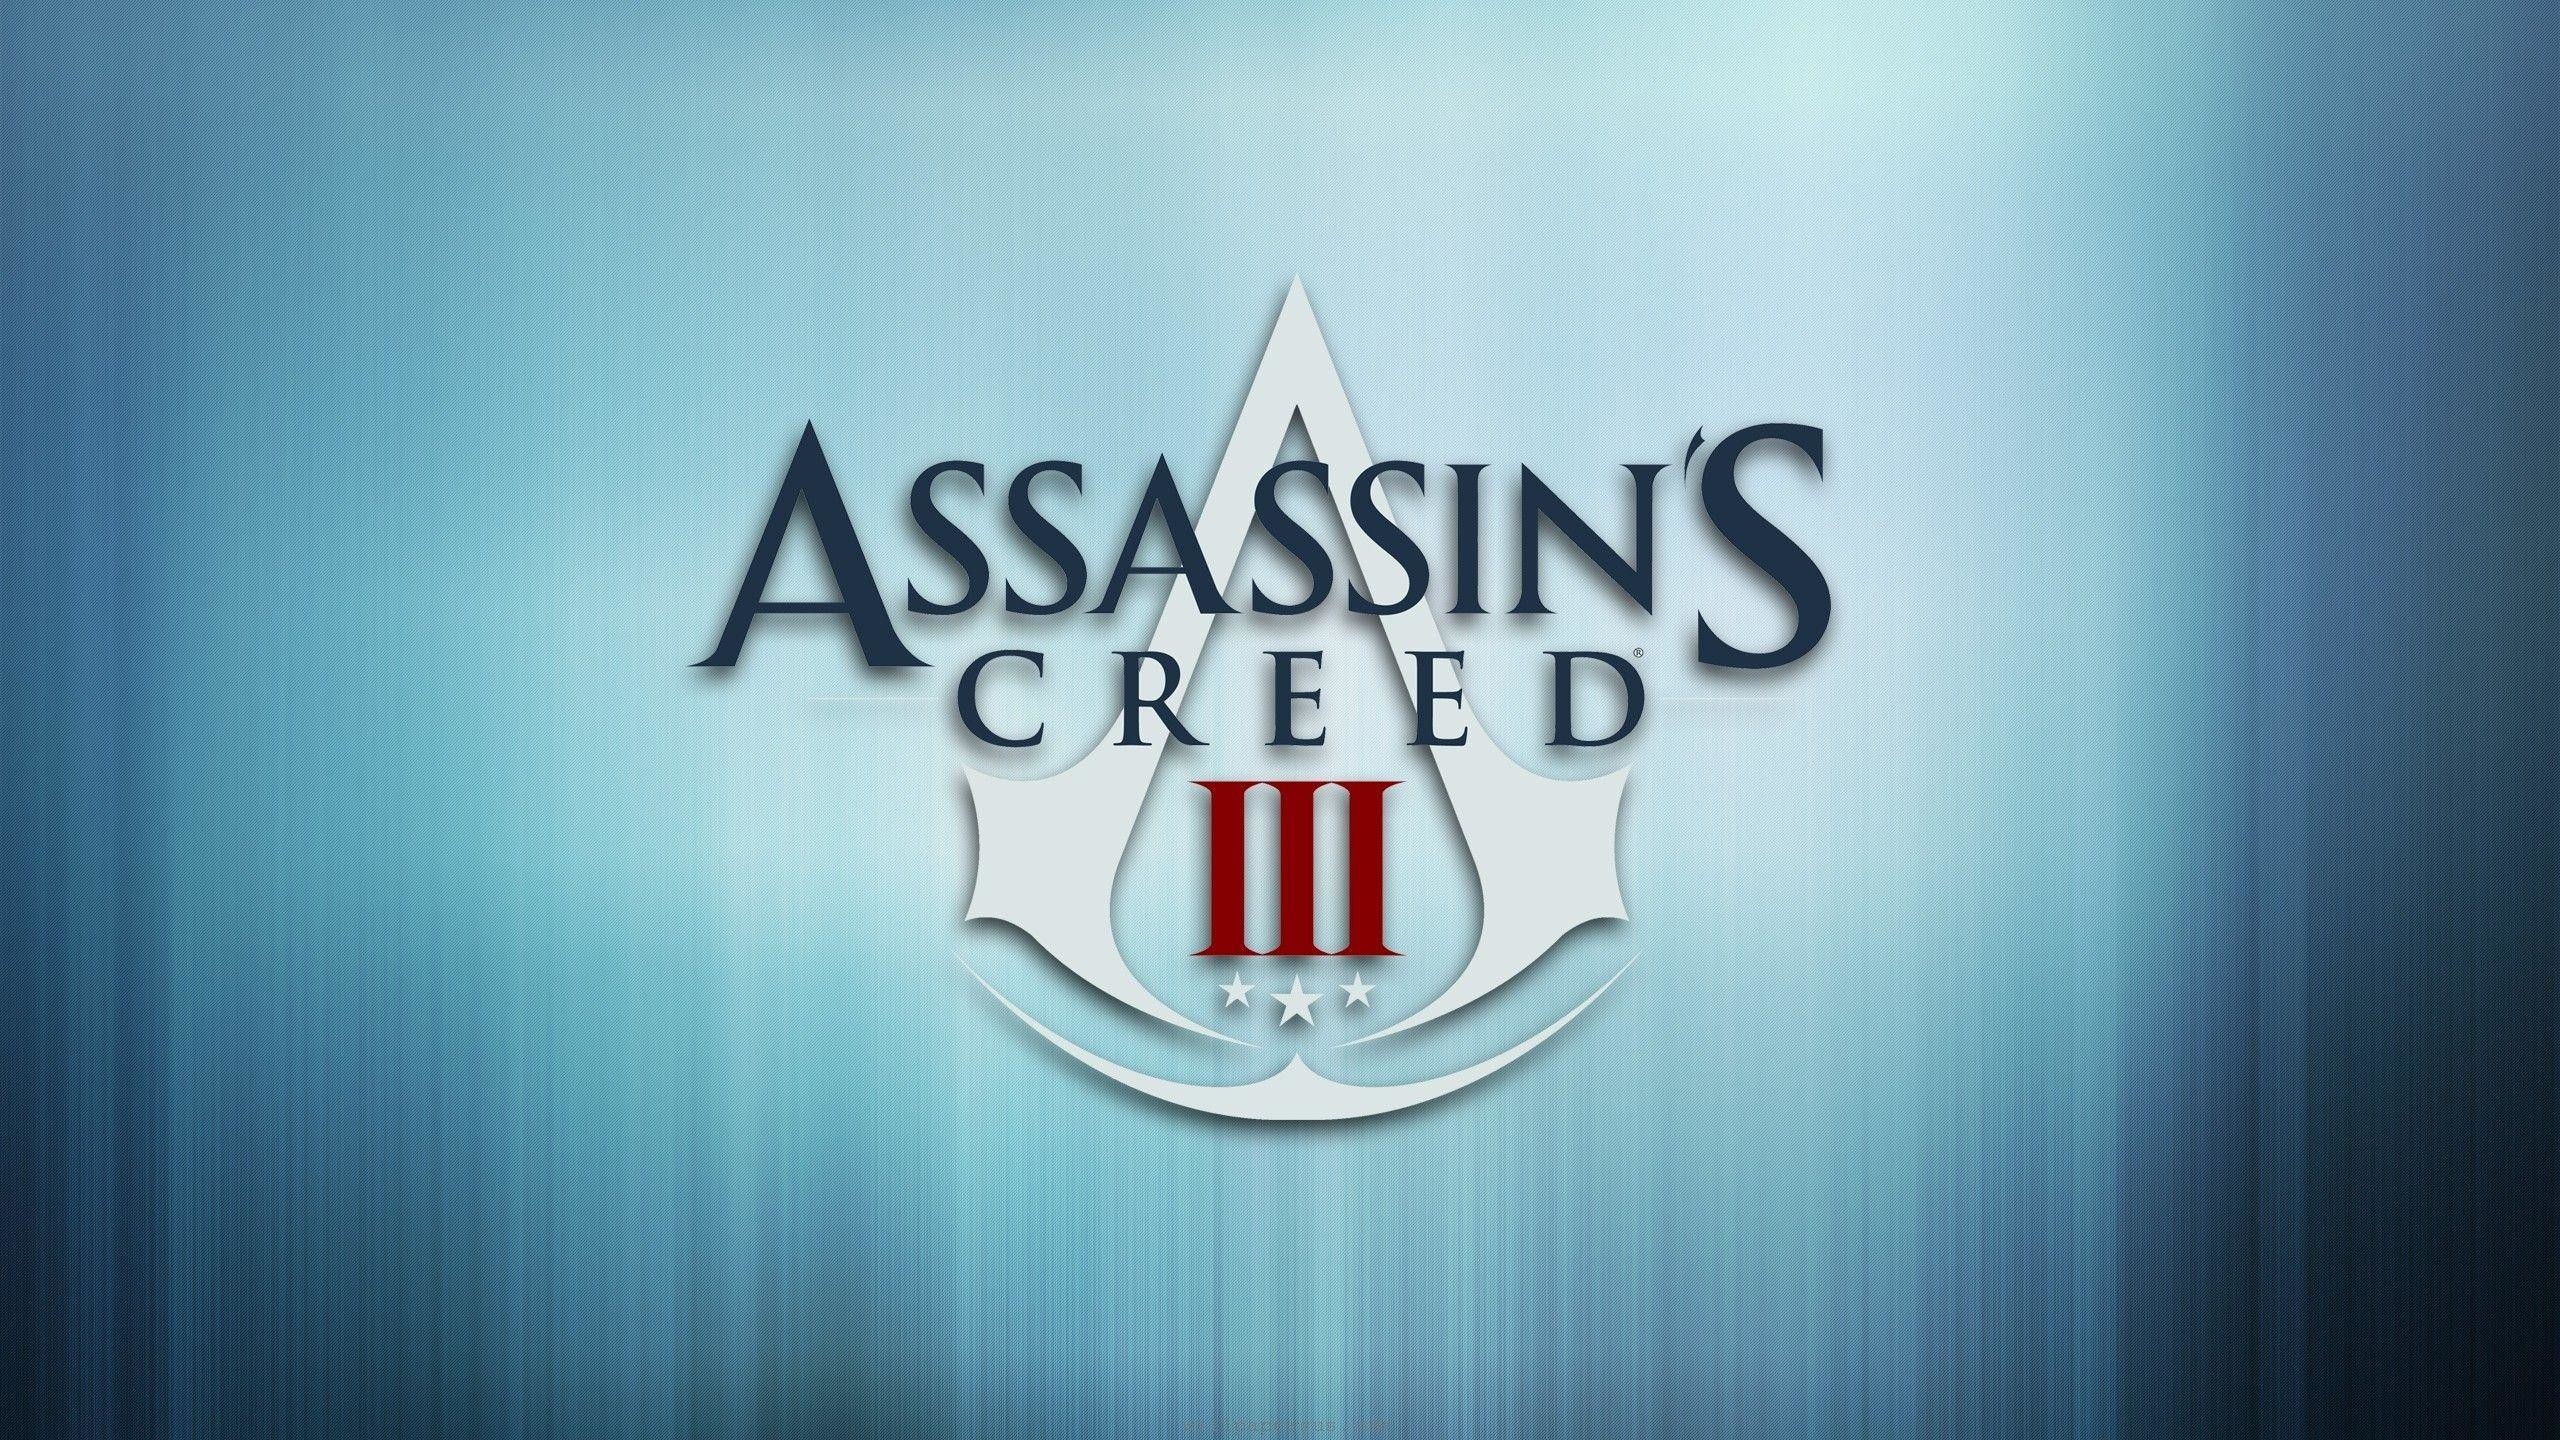 2560x1440 Download Assassin's Creed 3 Logo Wallpaper (5834) Full Size | Free .